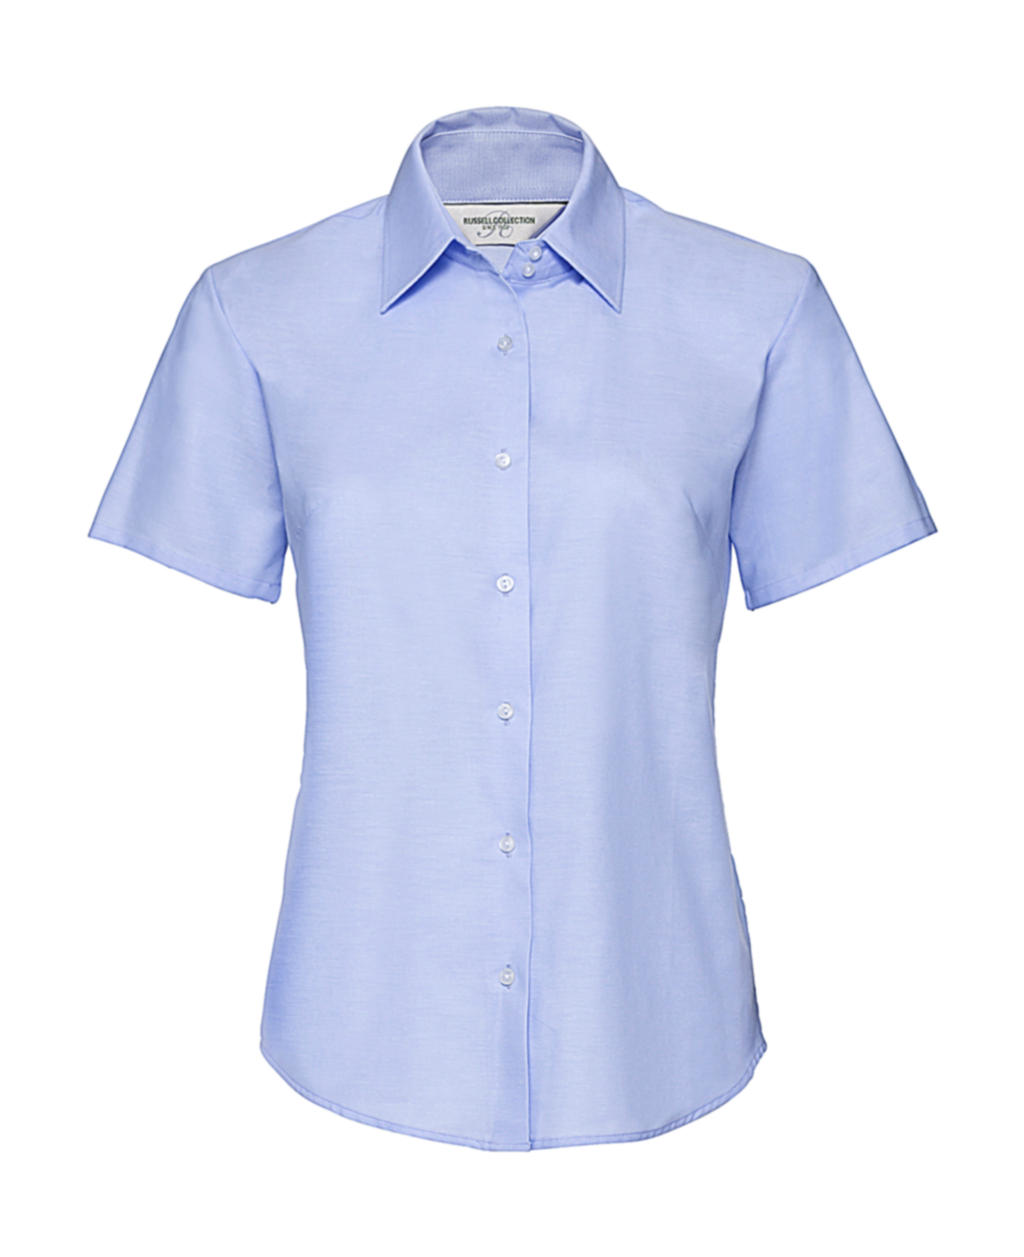  Ladies Classic Oxford Shirt in Farbe Oxford Blue